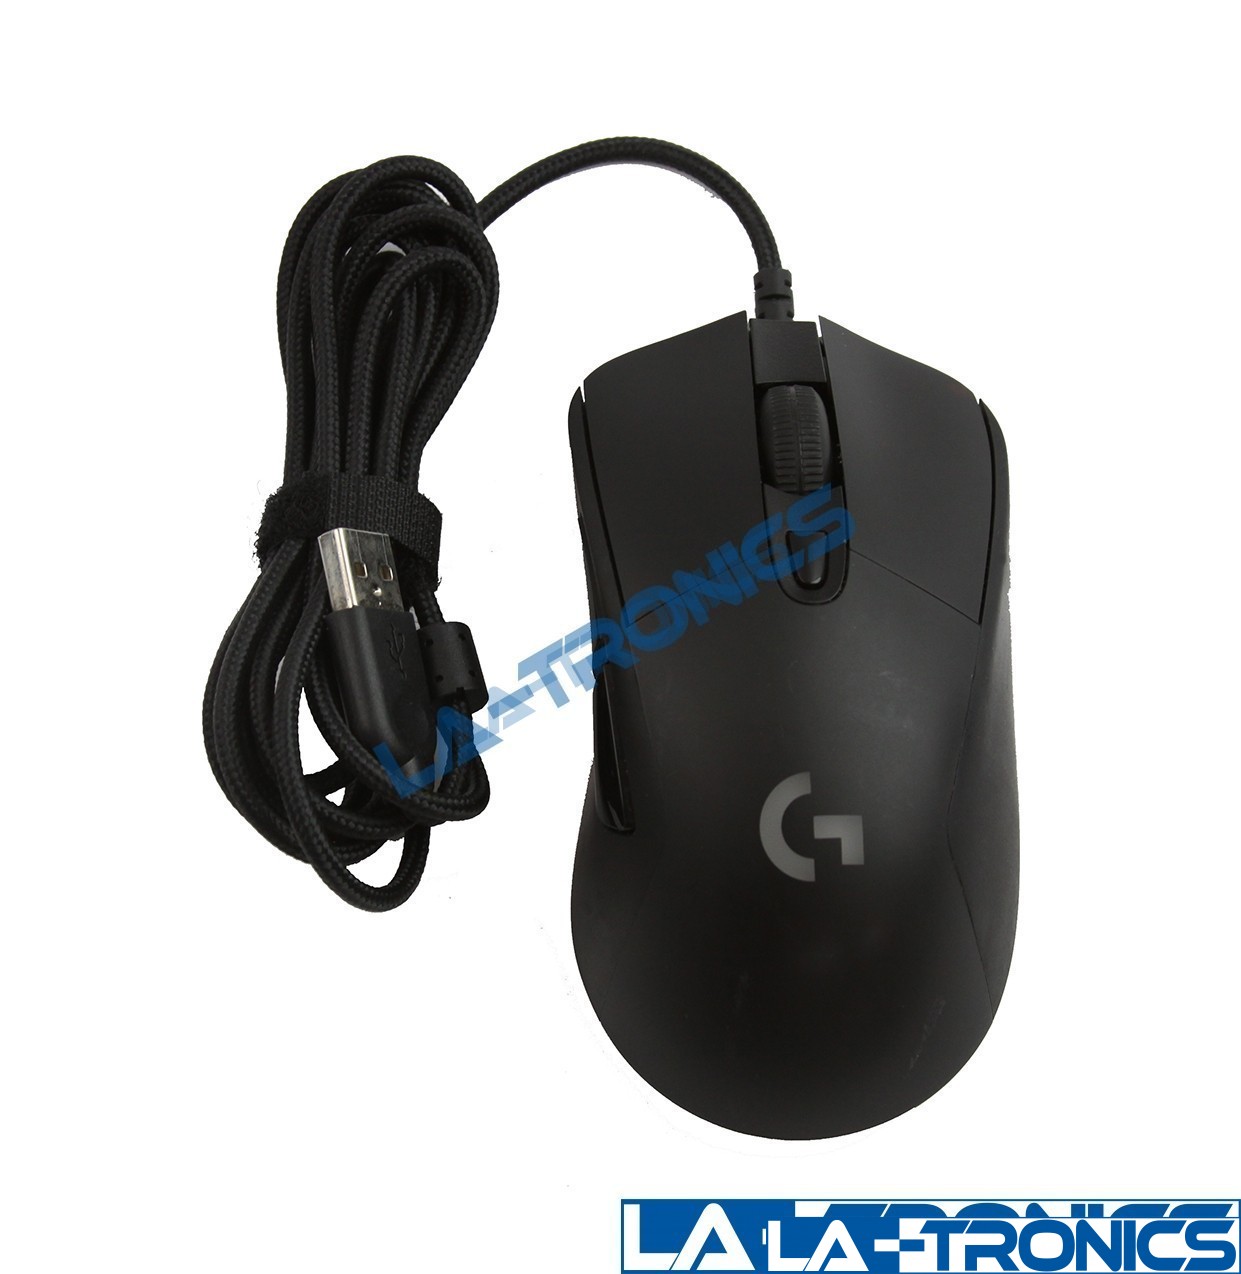 Logitech G403 HERO Wired Gaming Lightsync Optical Mouse